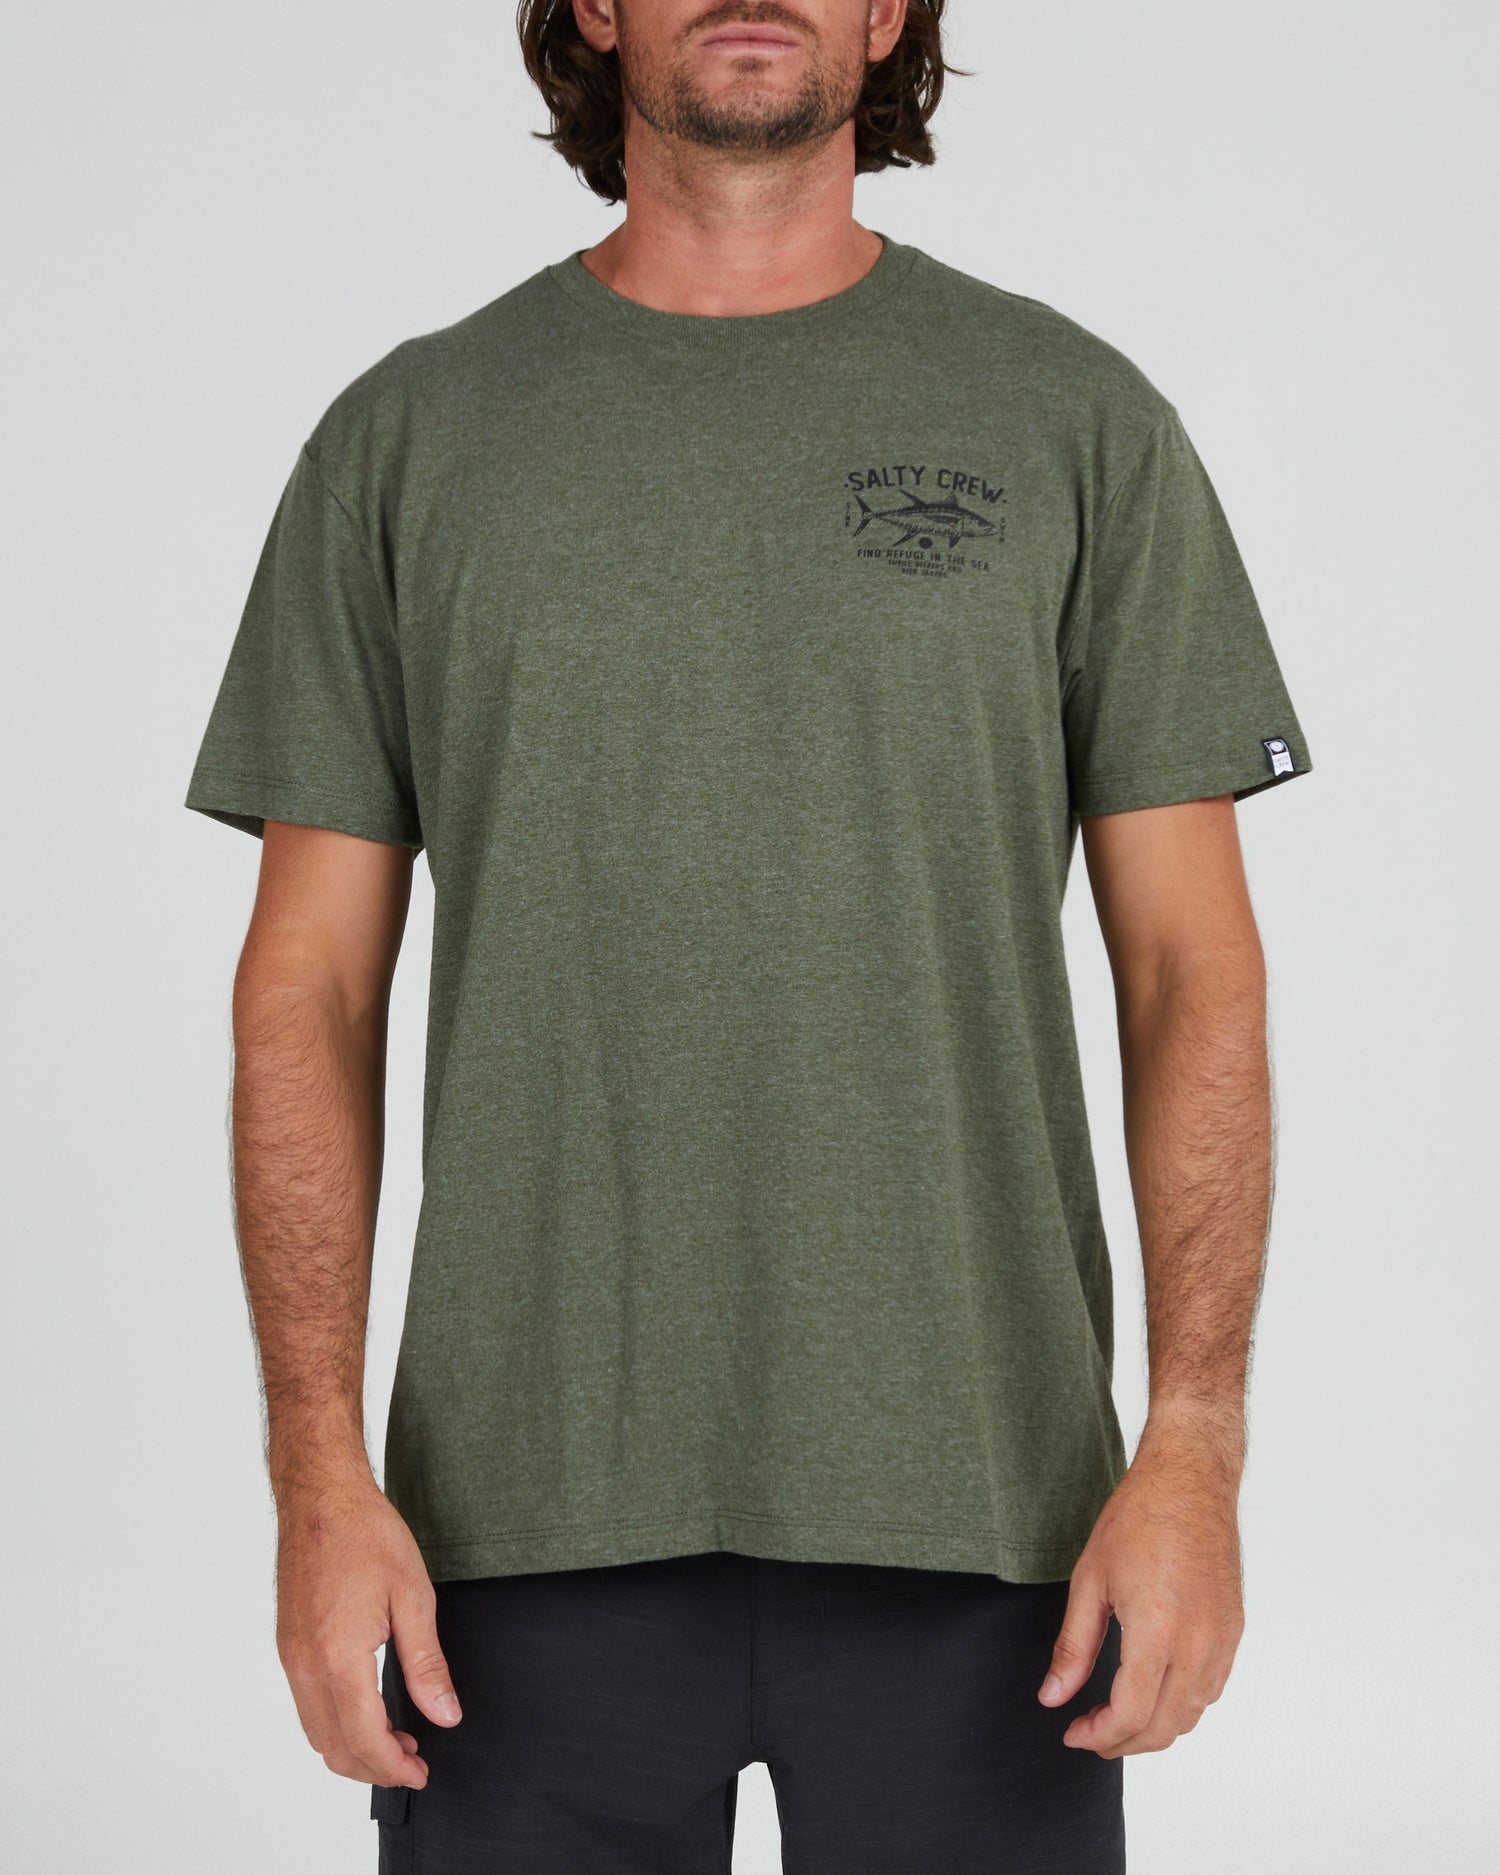 On body front of the Market Forest Heather S/S Standard Tee